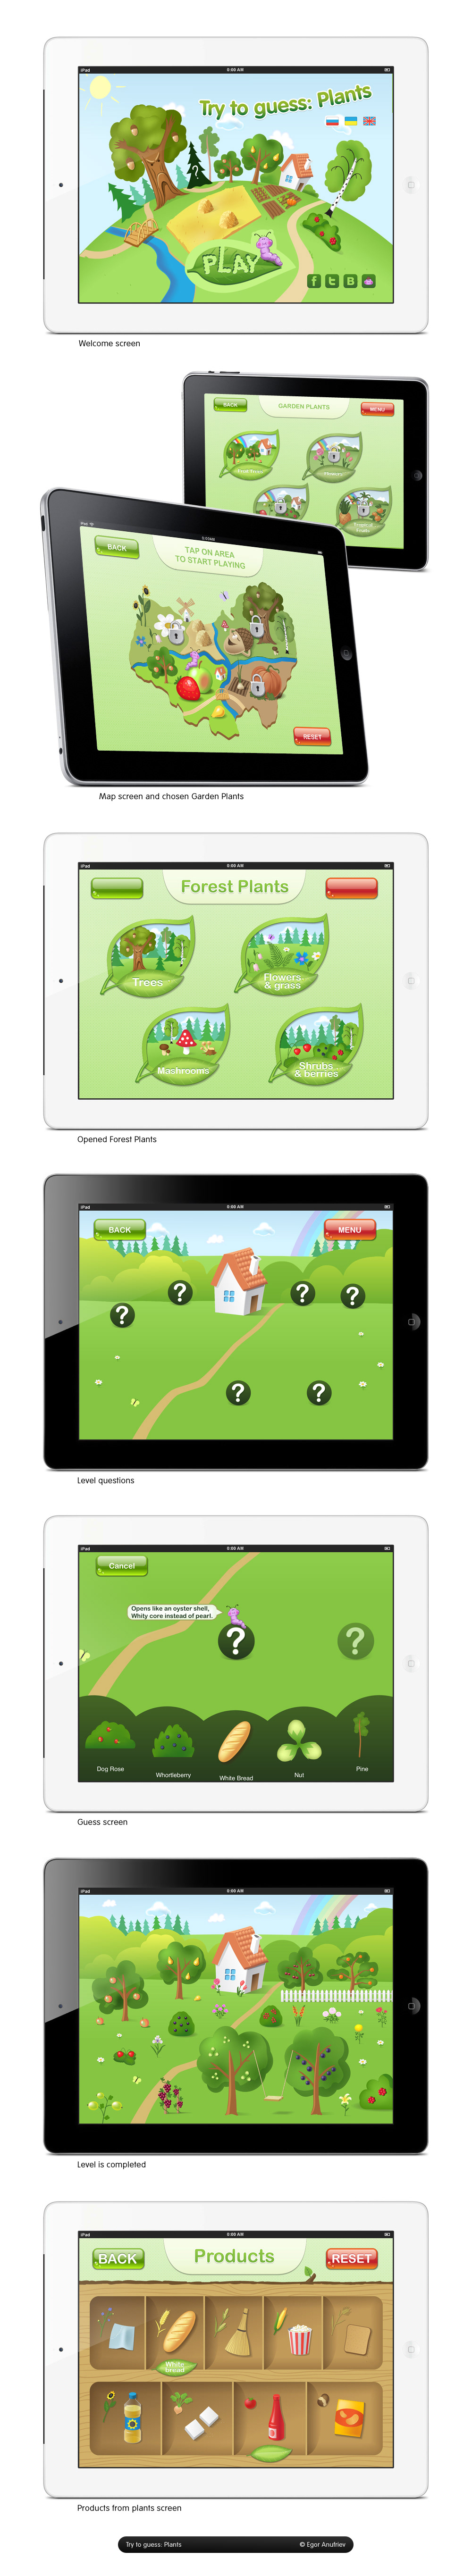 Plant iPad Mobile Application farm Caterpillar fruits forest game Tree  guess the plant oak garden